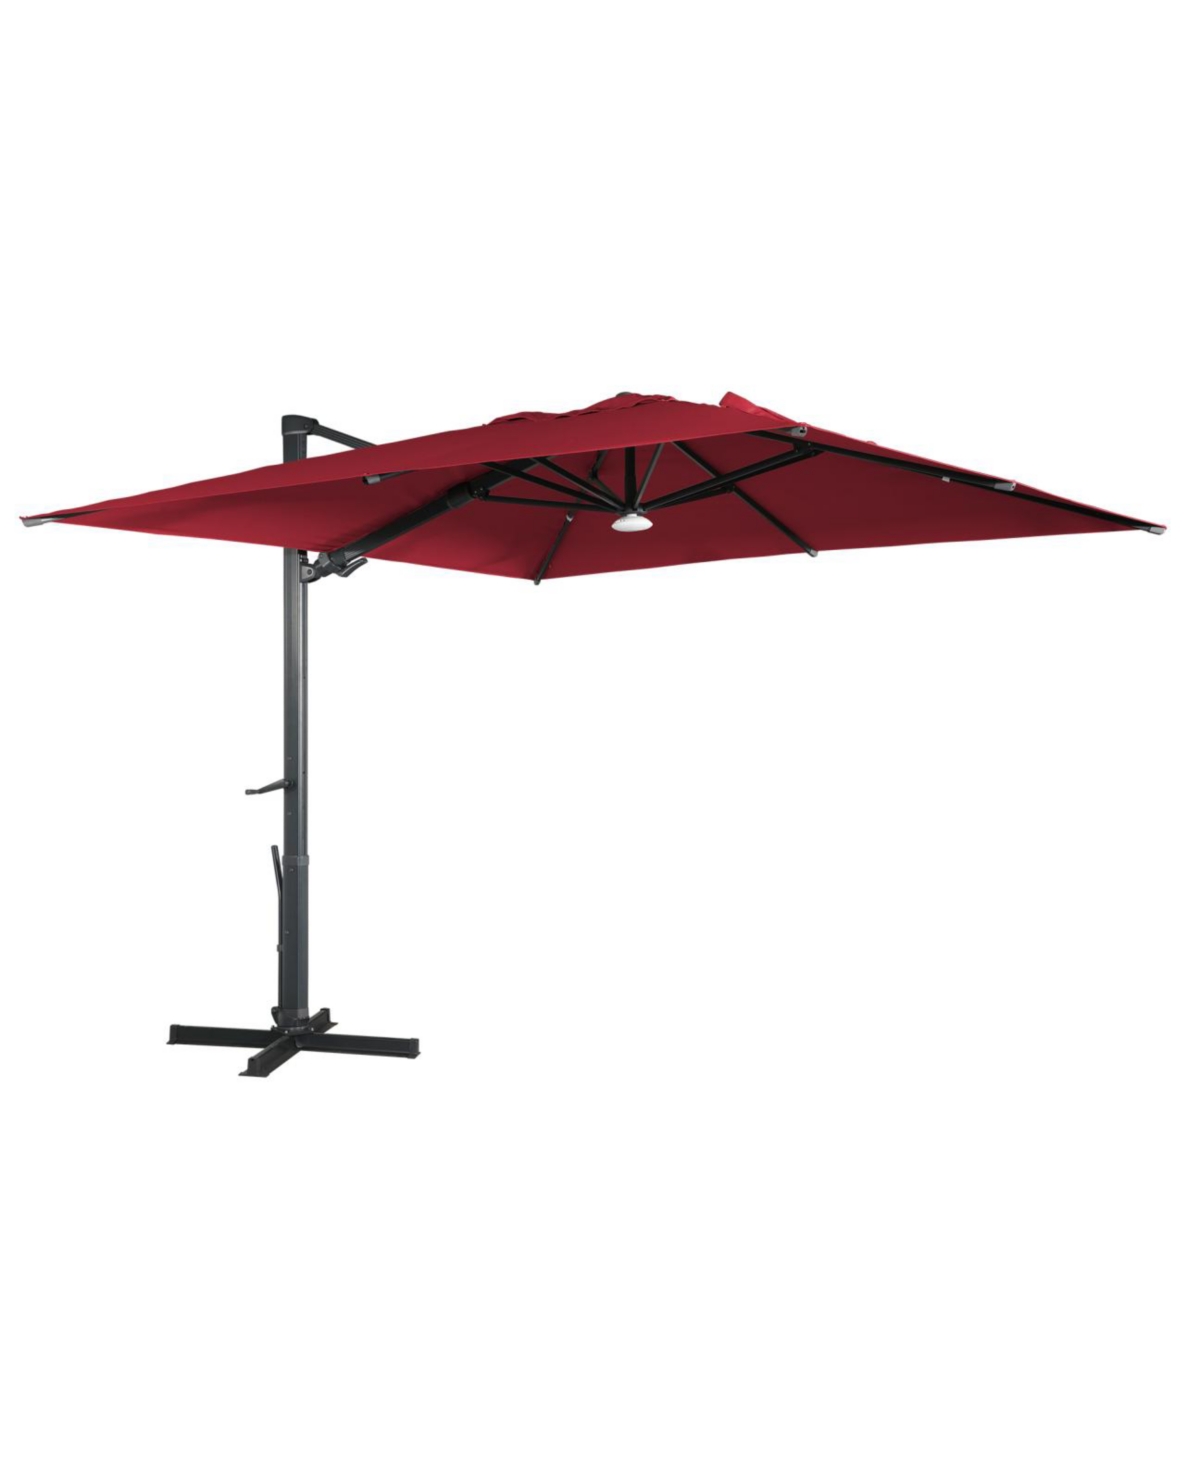 10ft Square Solar Led Cantilever Patio Umbrella with Bluetooth Light for Outdoor Shade - Gray